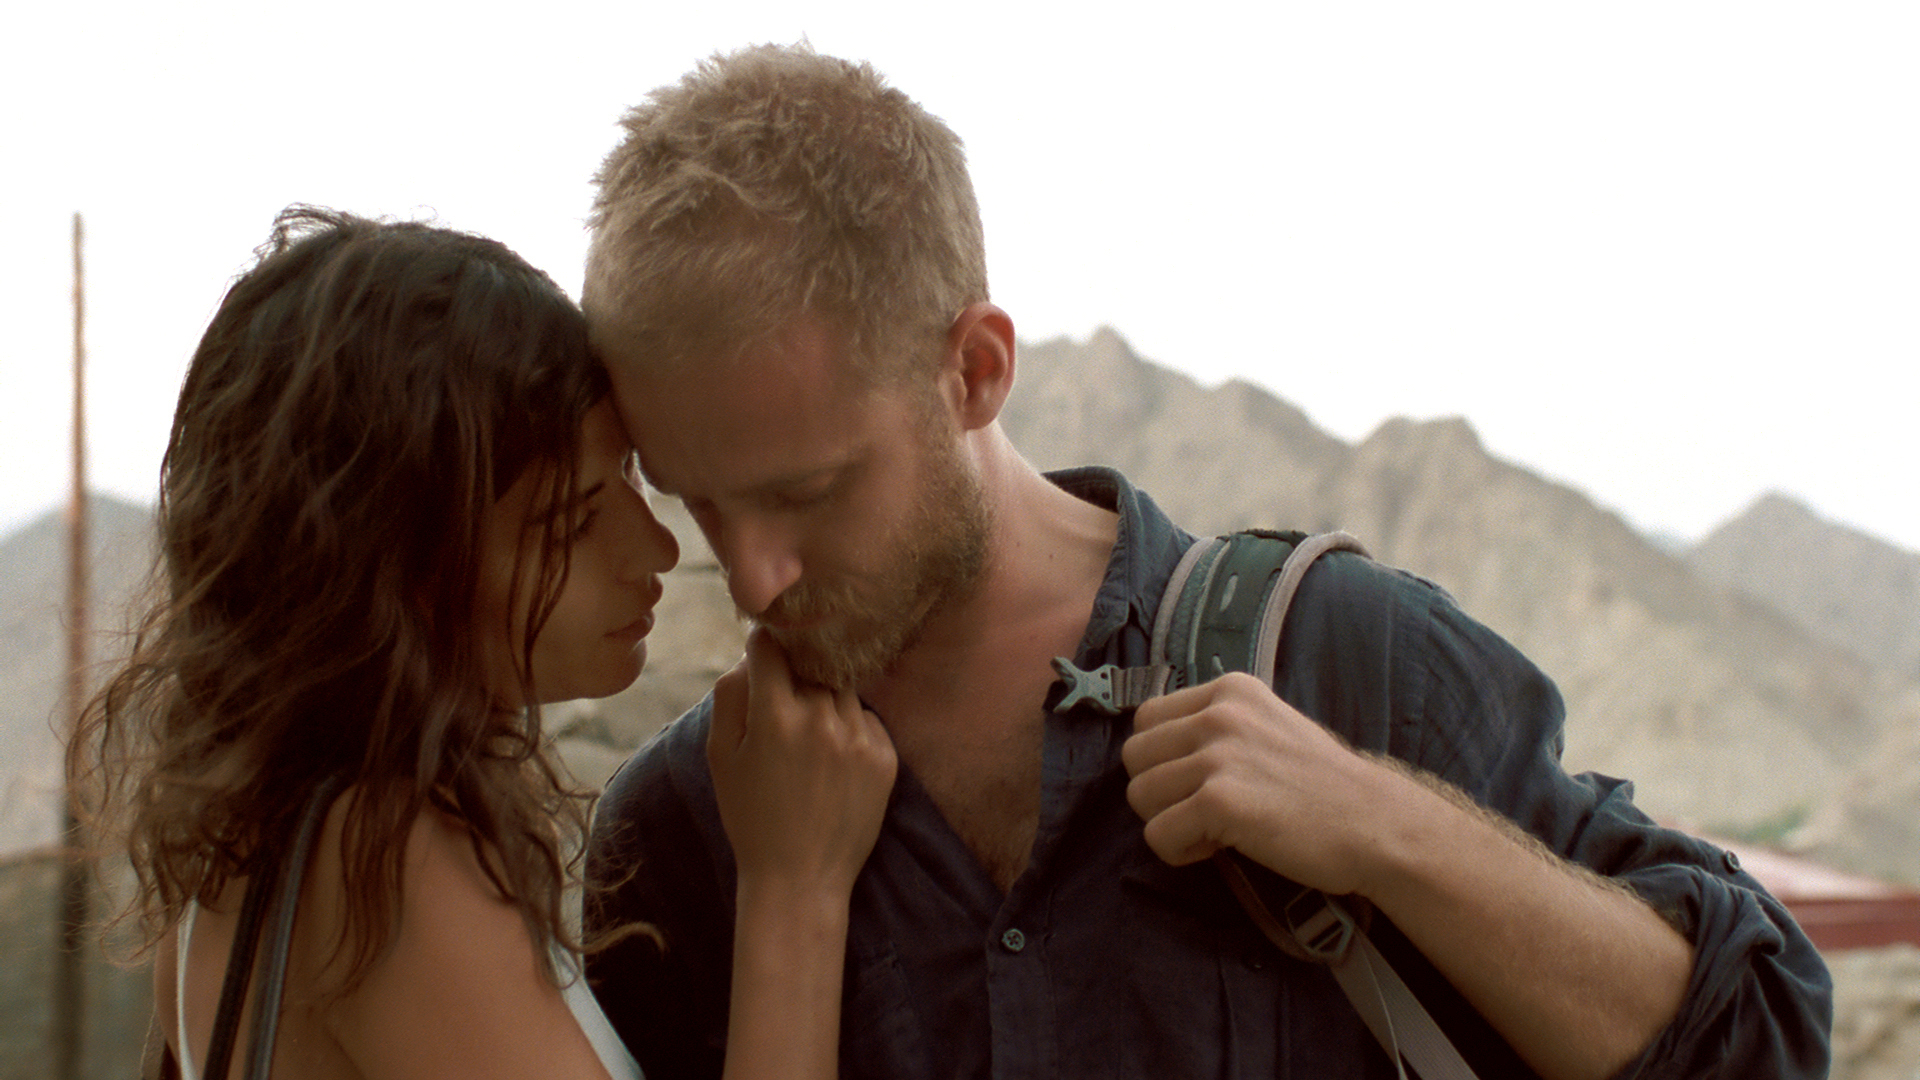 Still of Ben Foster and Lubna Azabal in Here (2011)